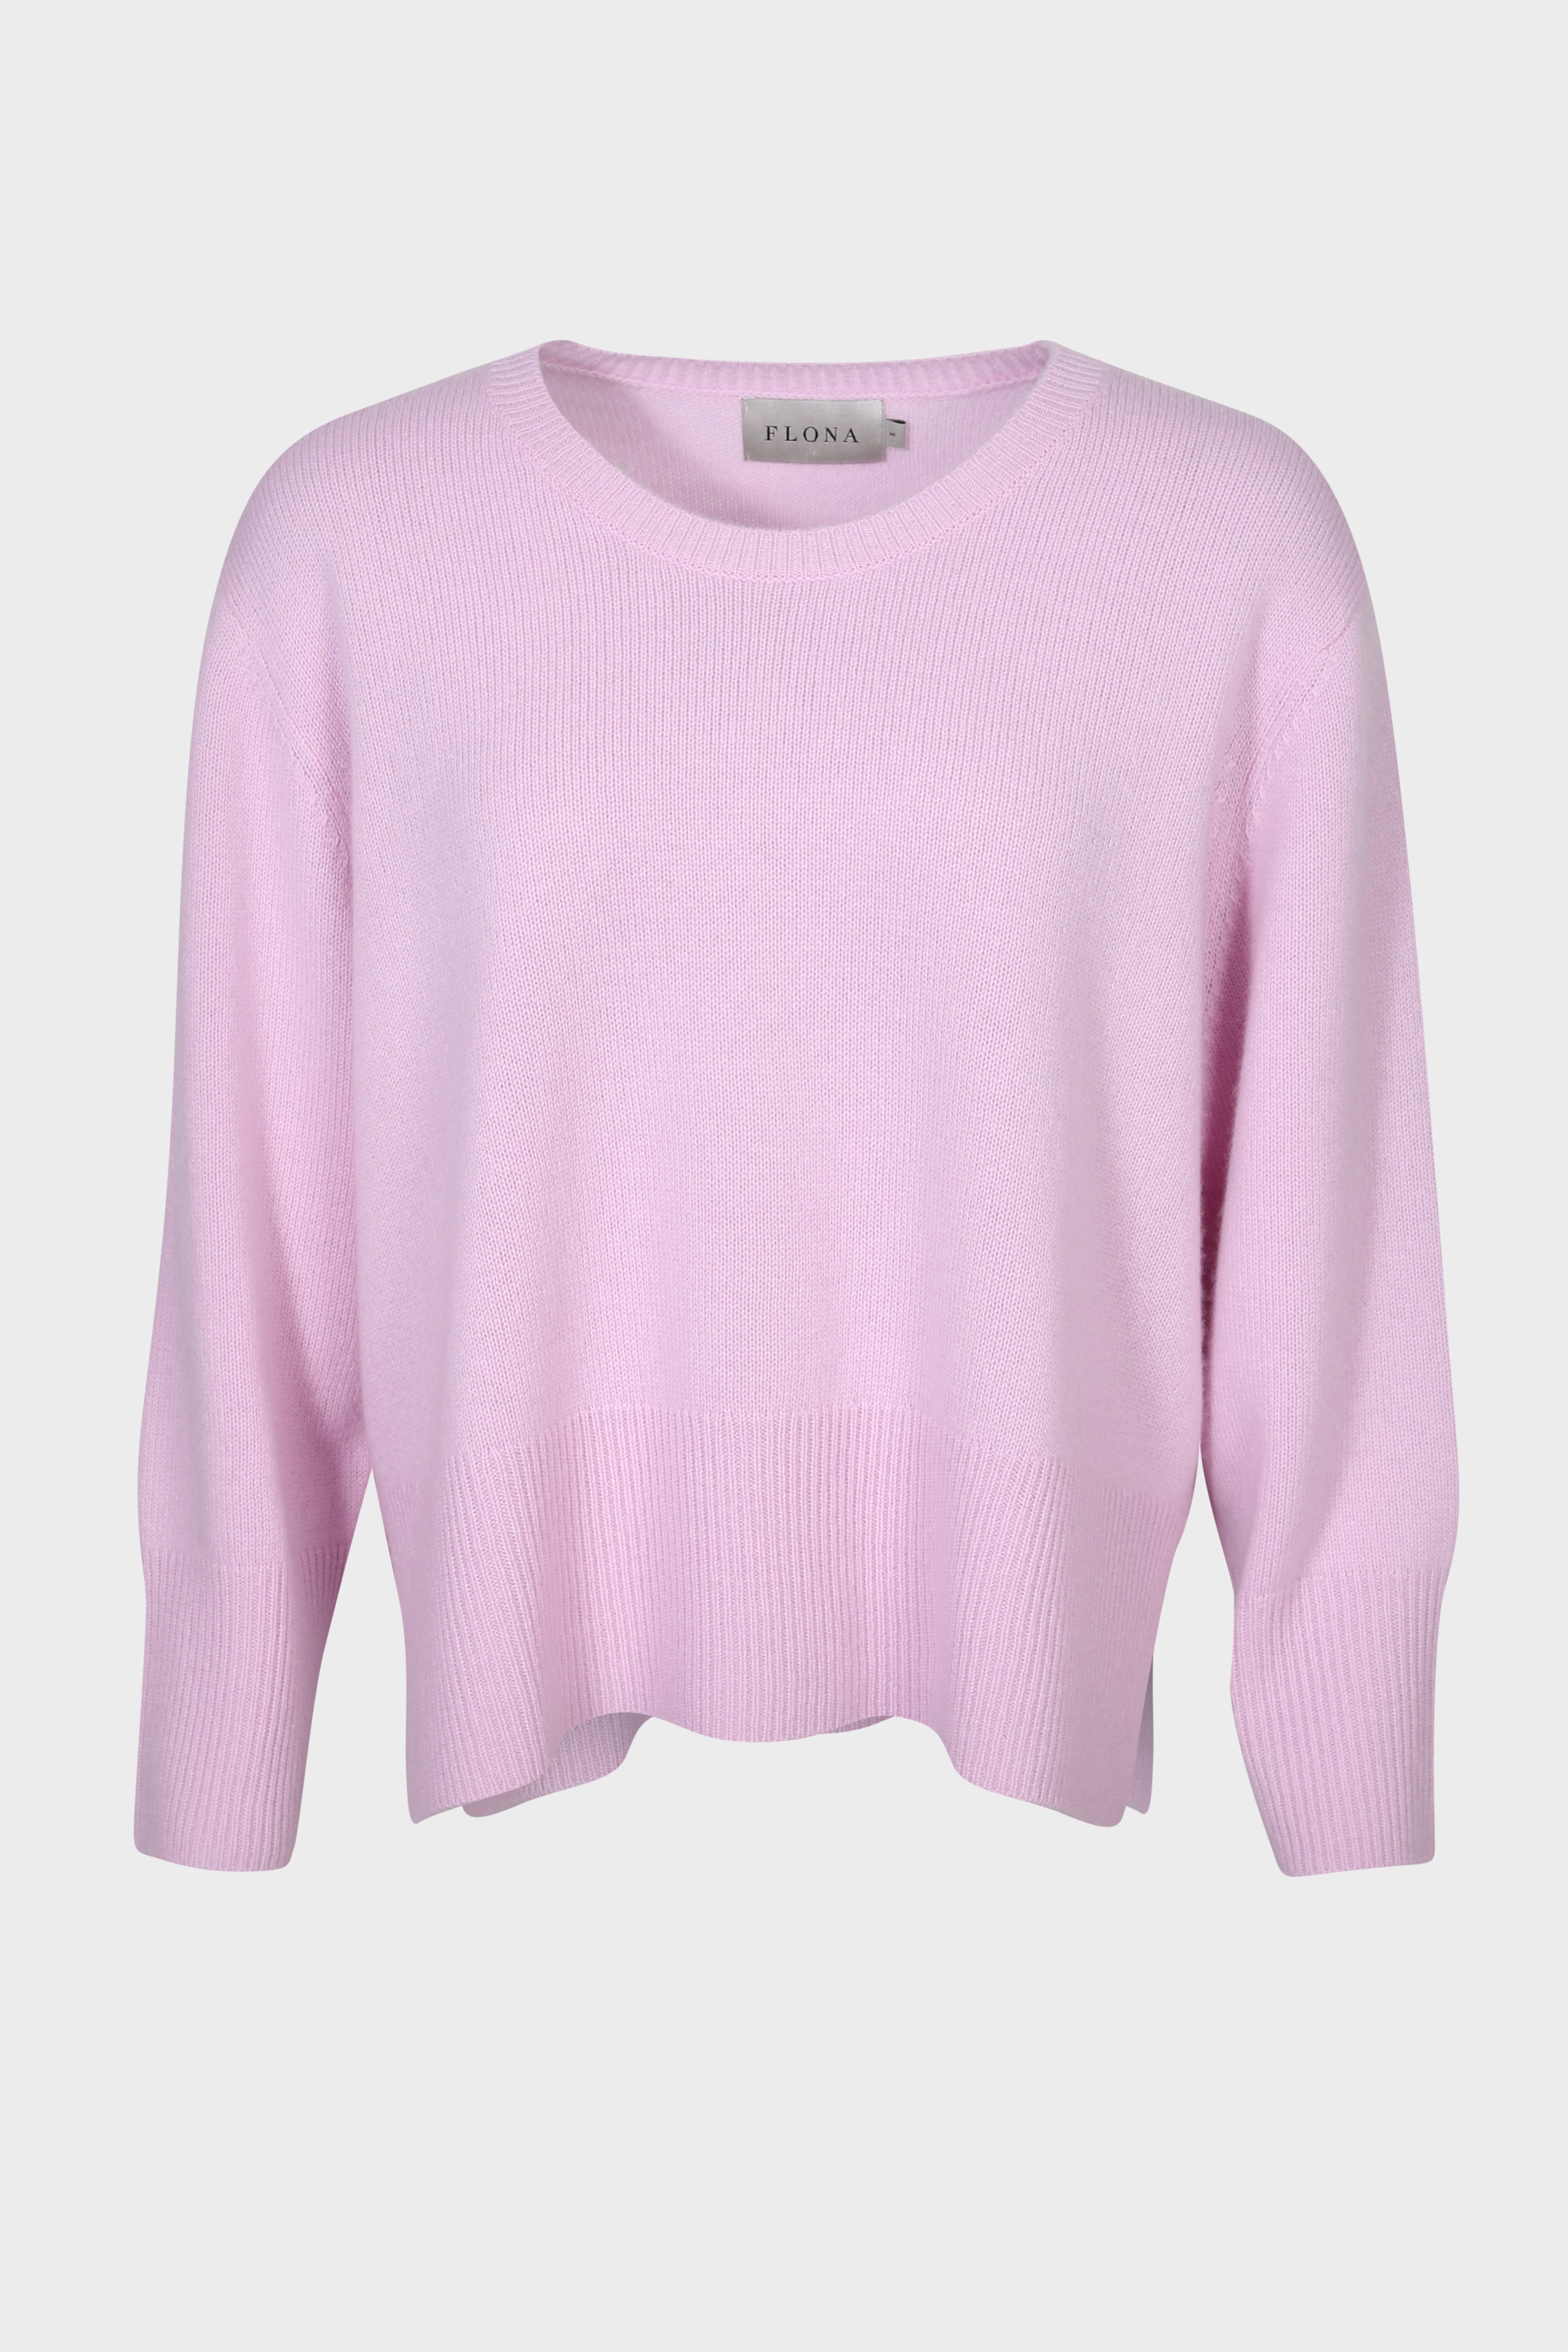 FLONA Cashmere Sweater in Pink XS